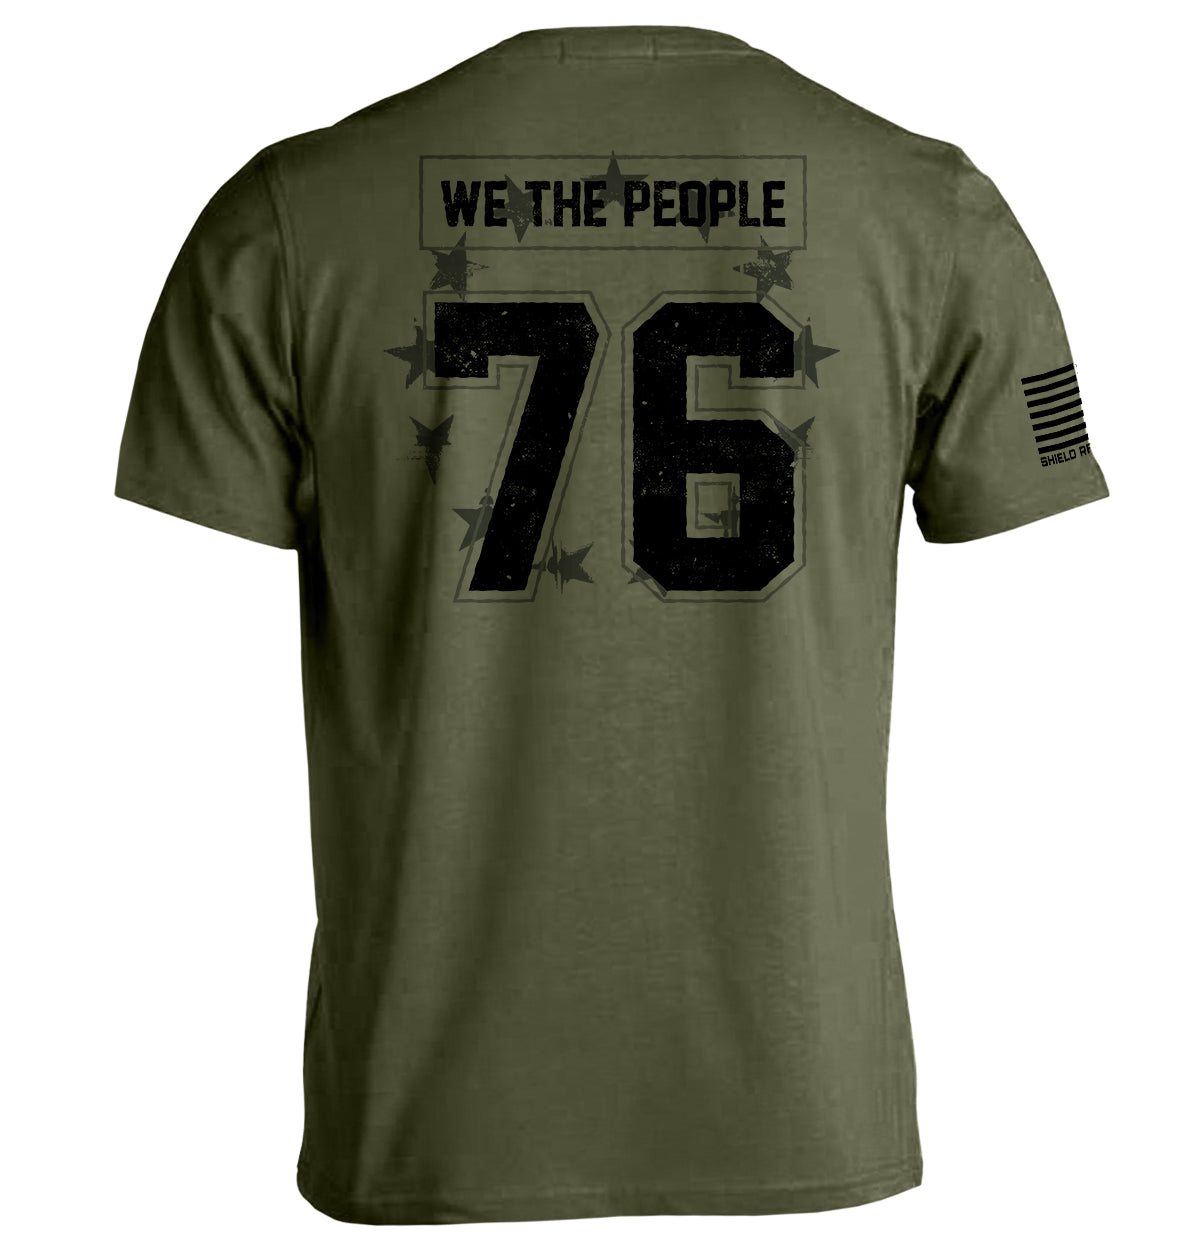 We the People 76 Jersey